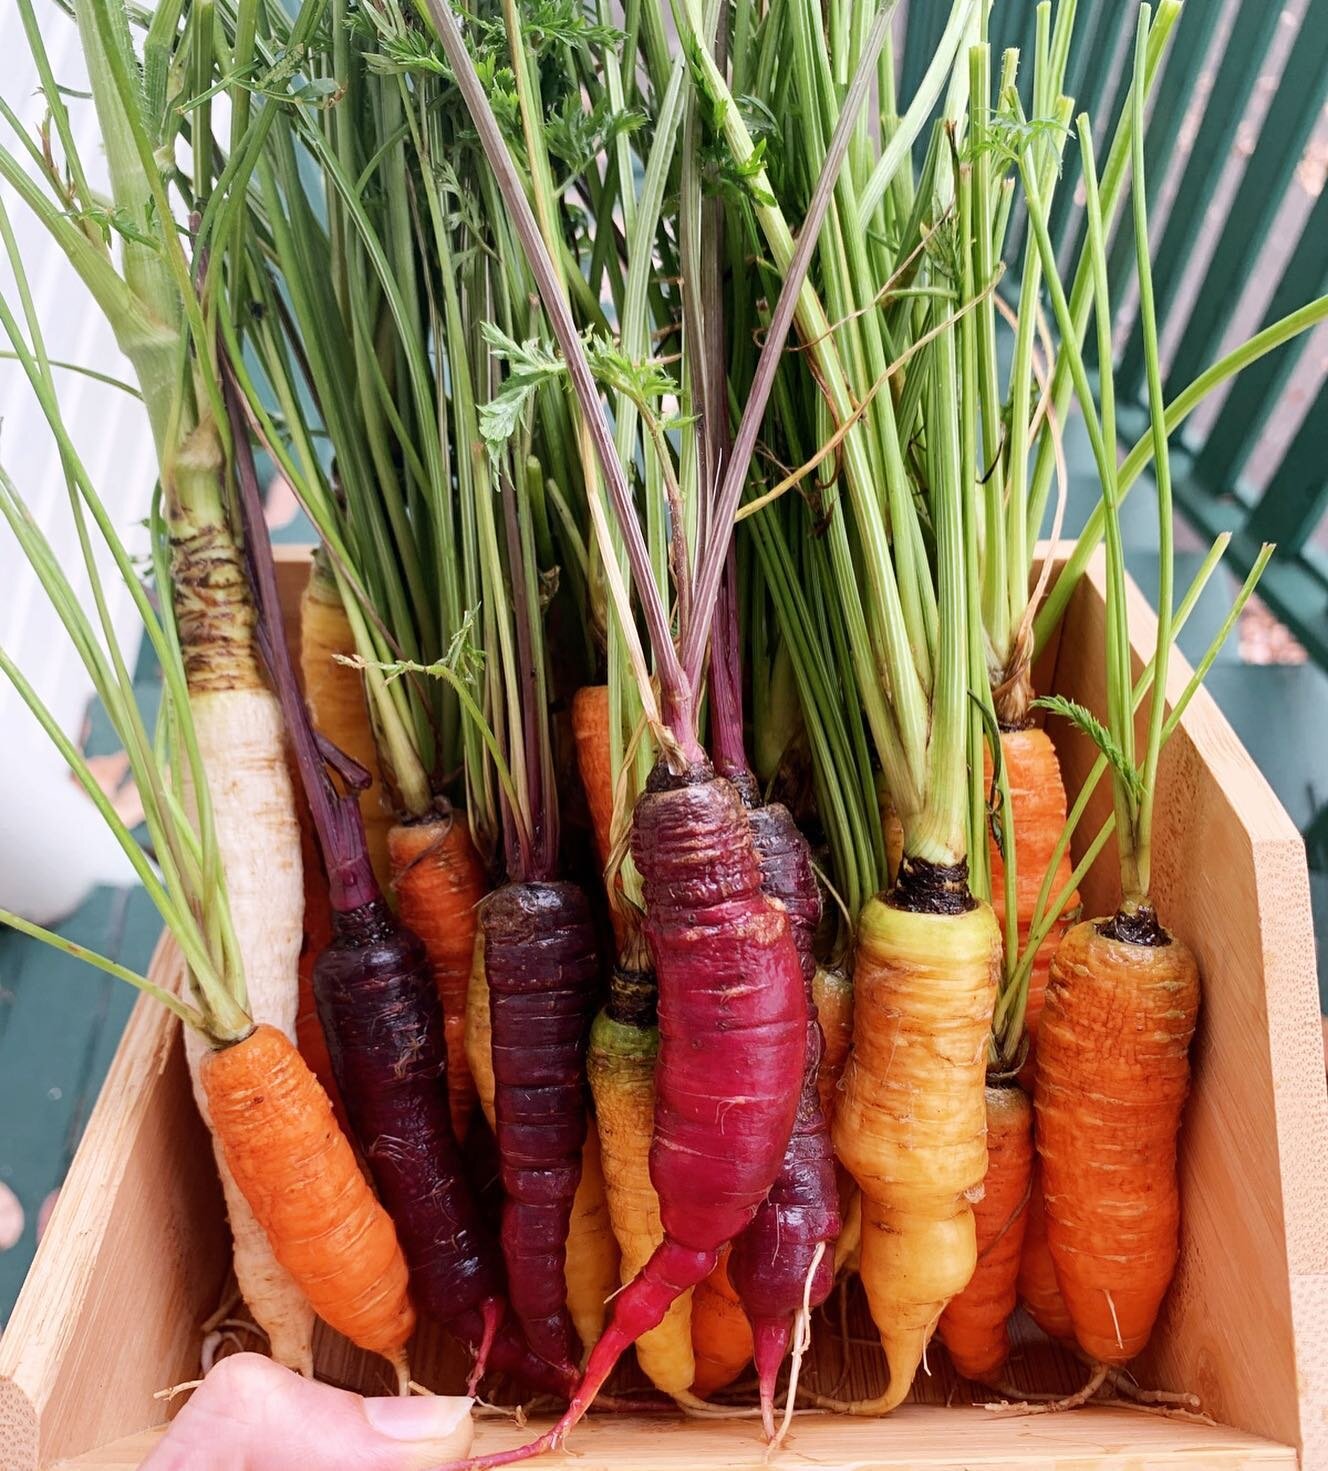 Our first harvest of homegrown heirloom carrots. From our paddock to your plate 🥕